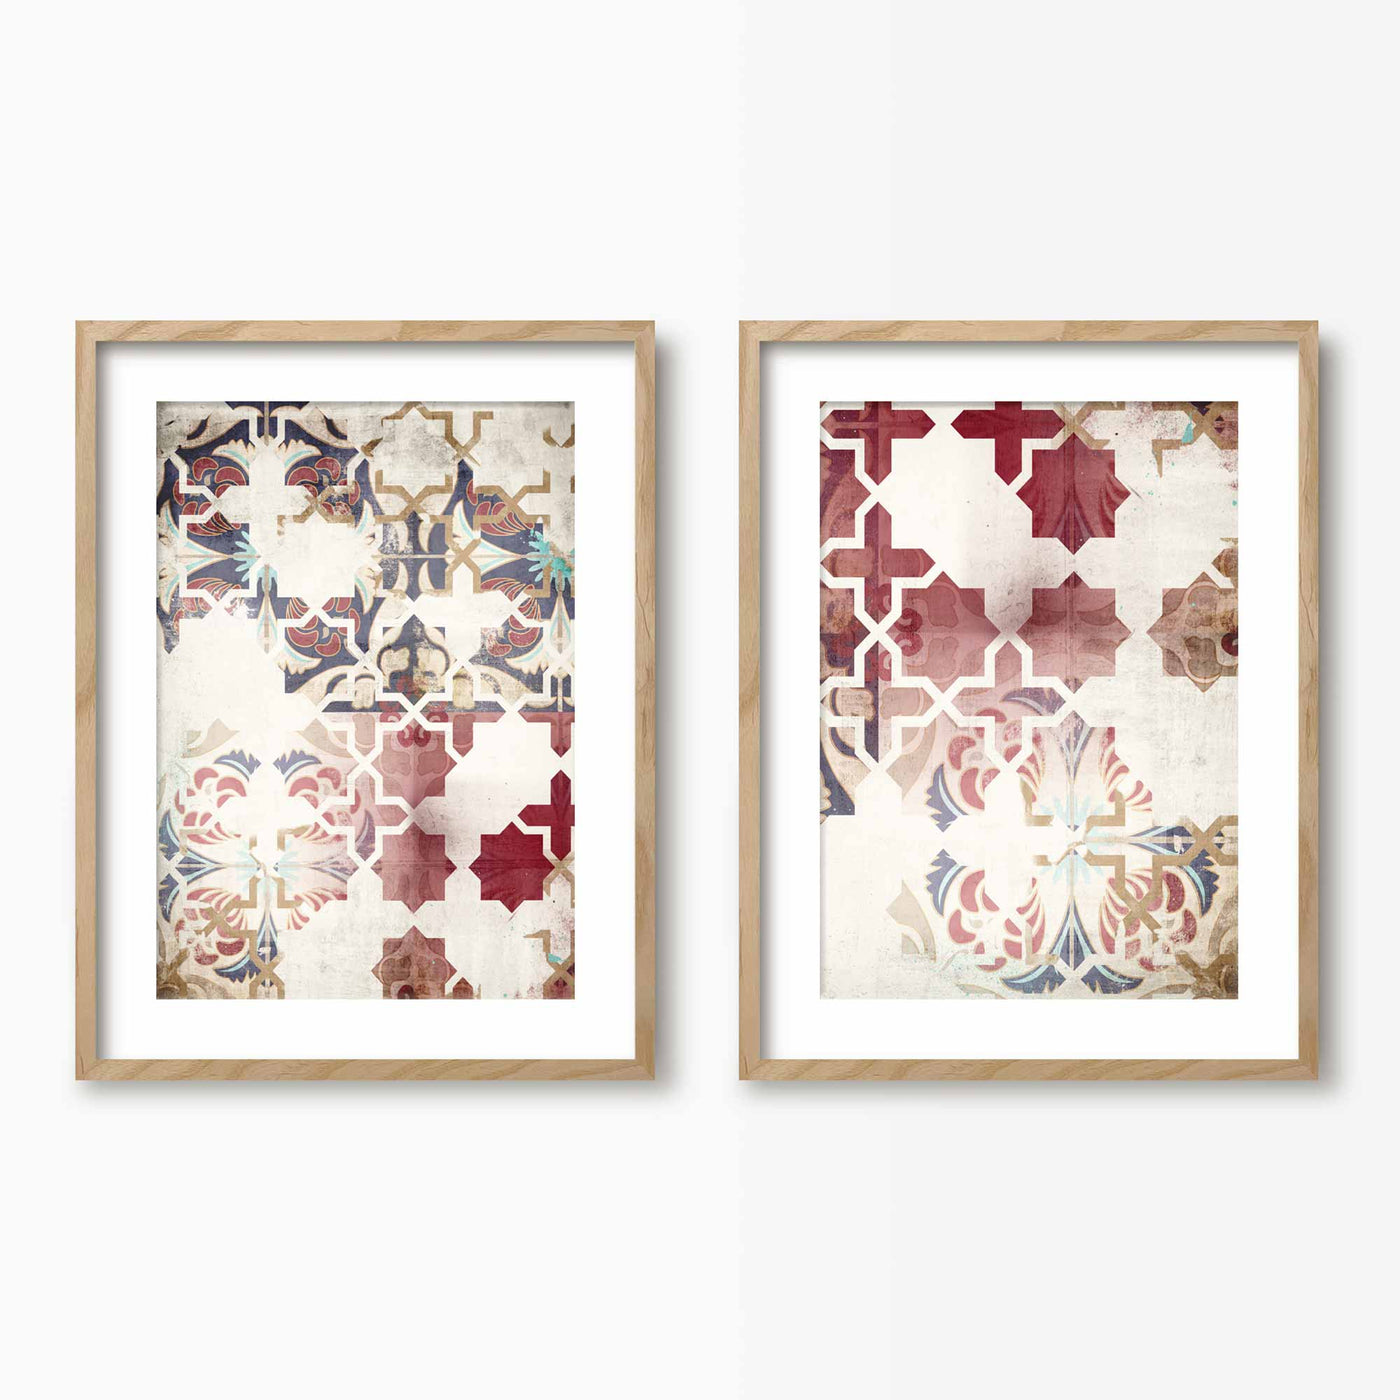 Green Lili 30x40cm (12x16") / Natural Frame + Mount Red Moroccan Tiles Wall Art Set